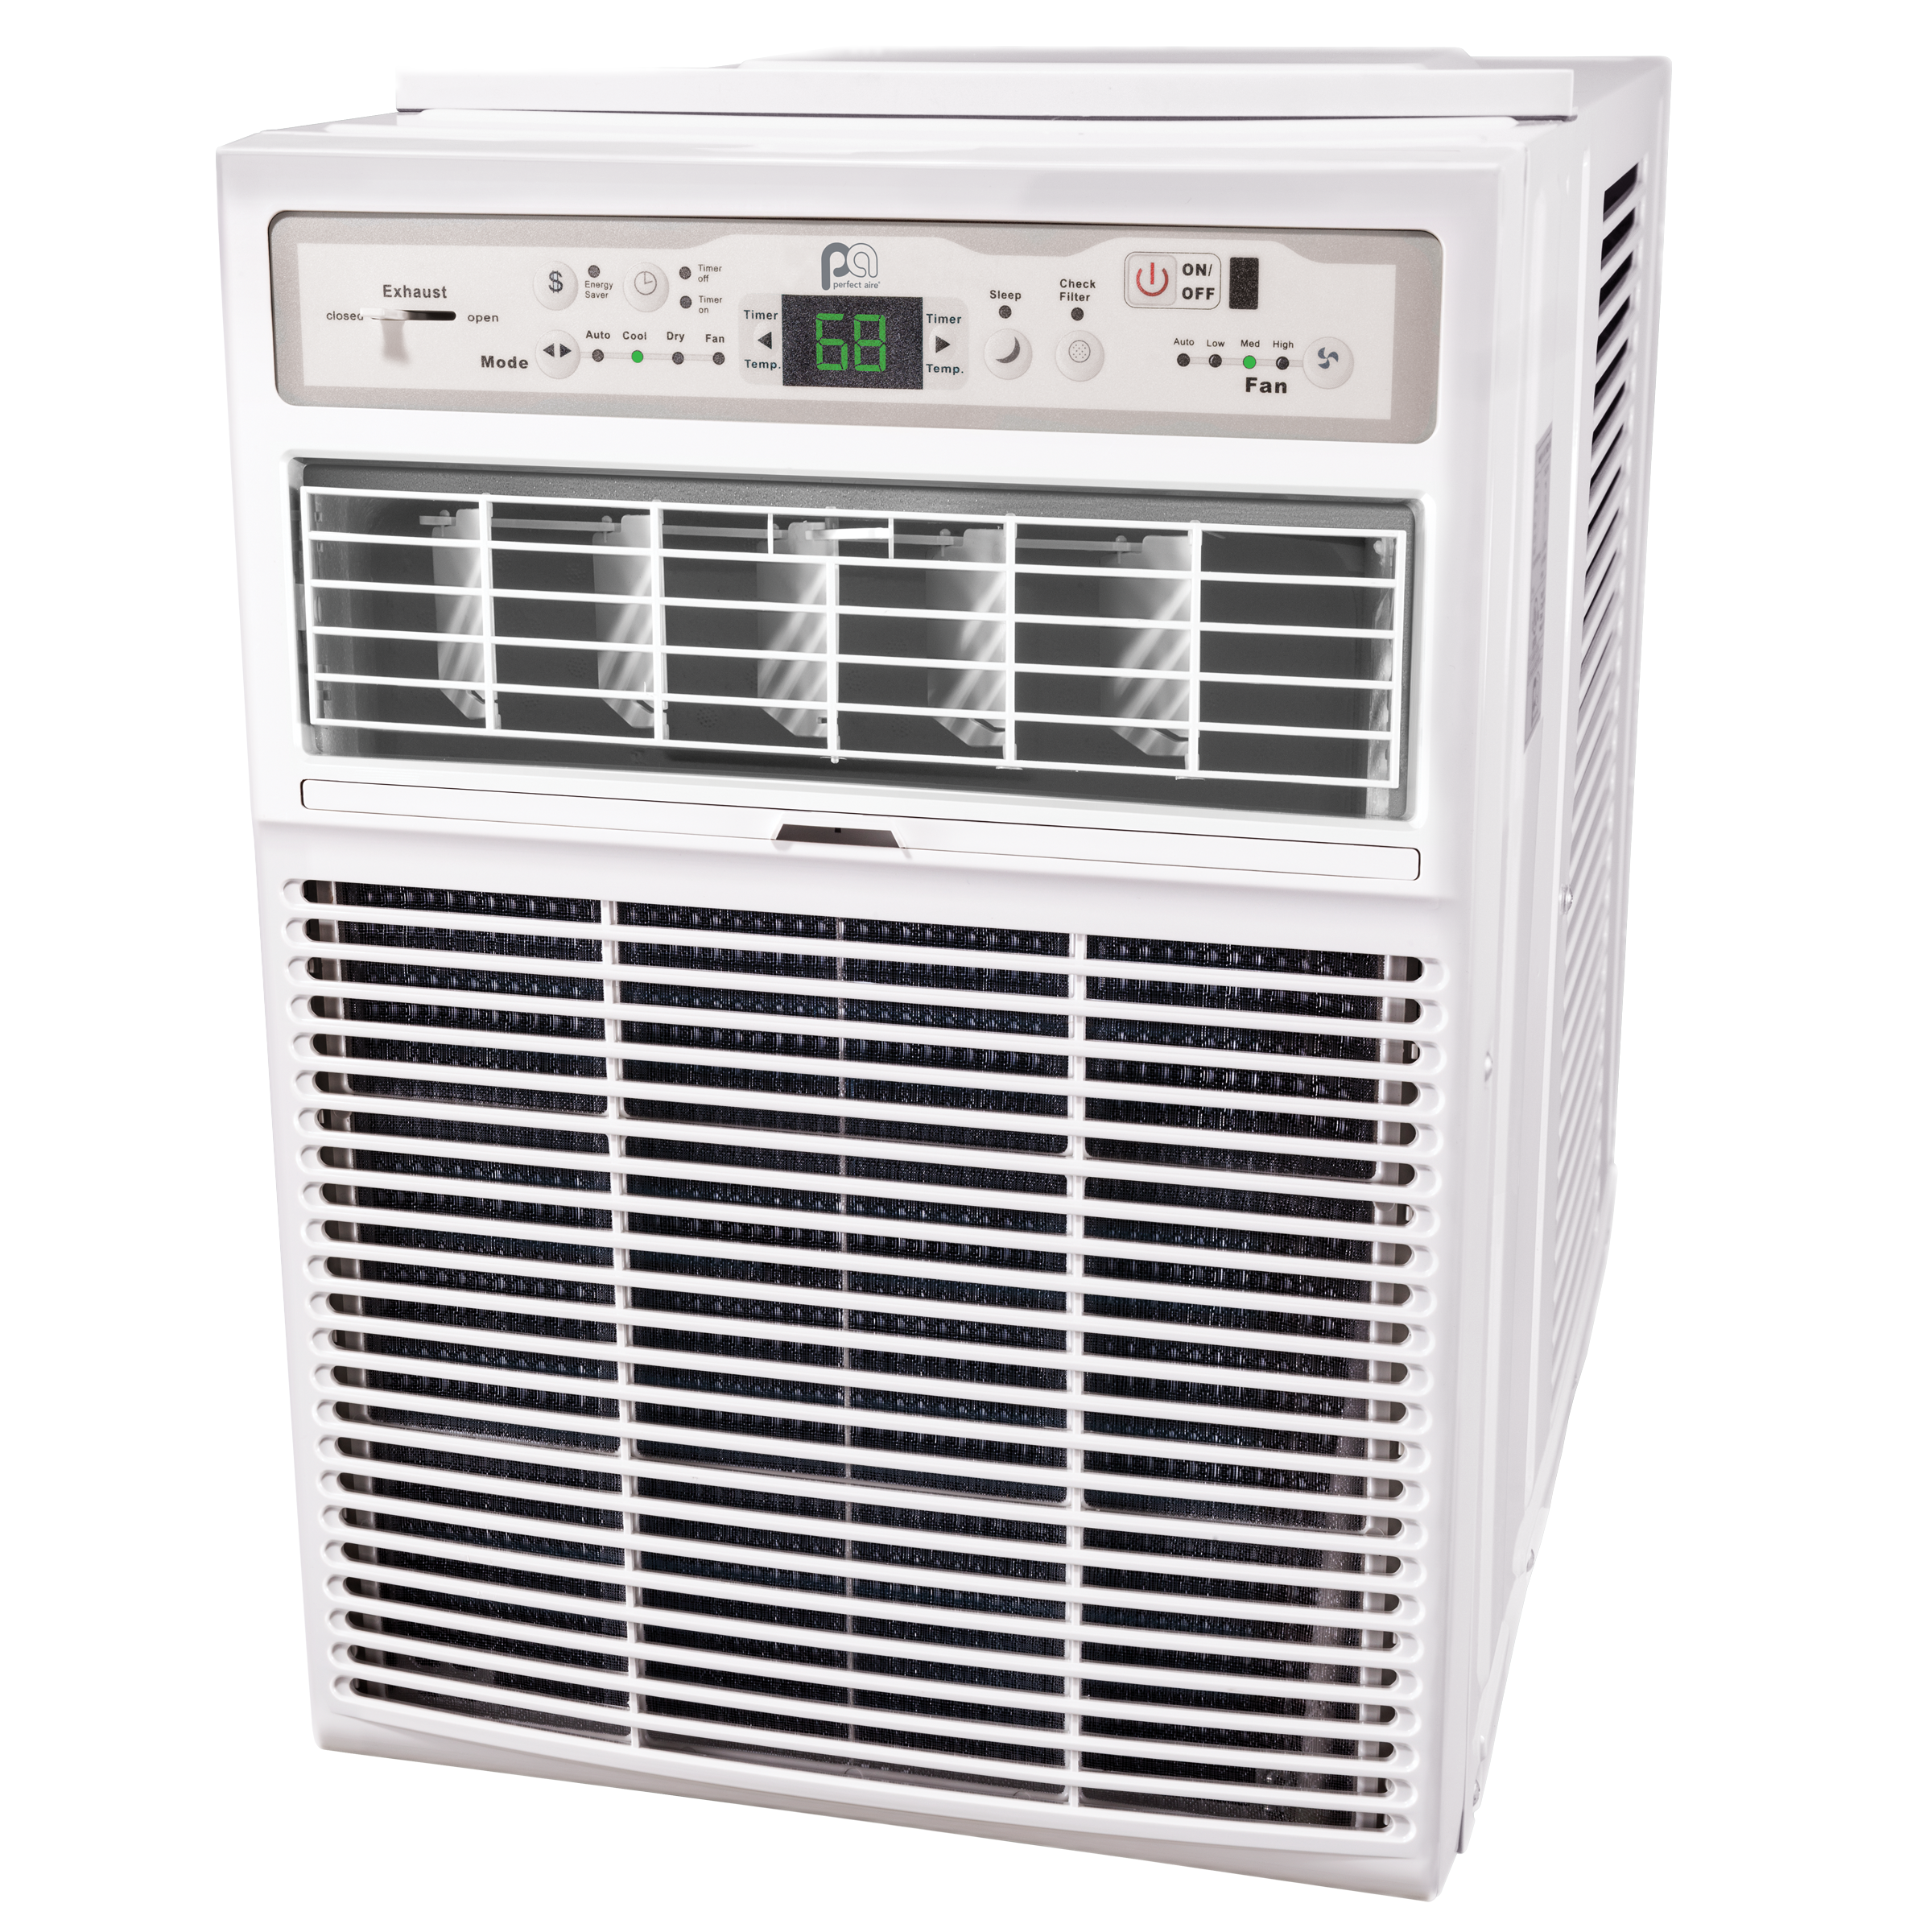 3PASC10000 Perfect Aire 10,000 BTU Casement Slider Window Air Conditioner, Sq. ft: 400-450 Coverage, With Remote Control